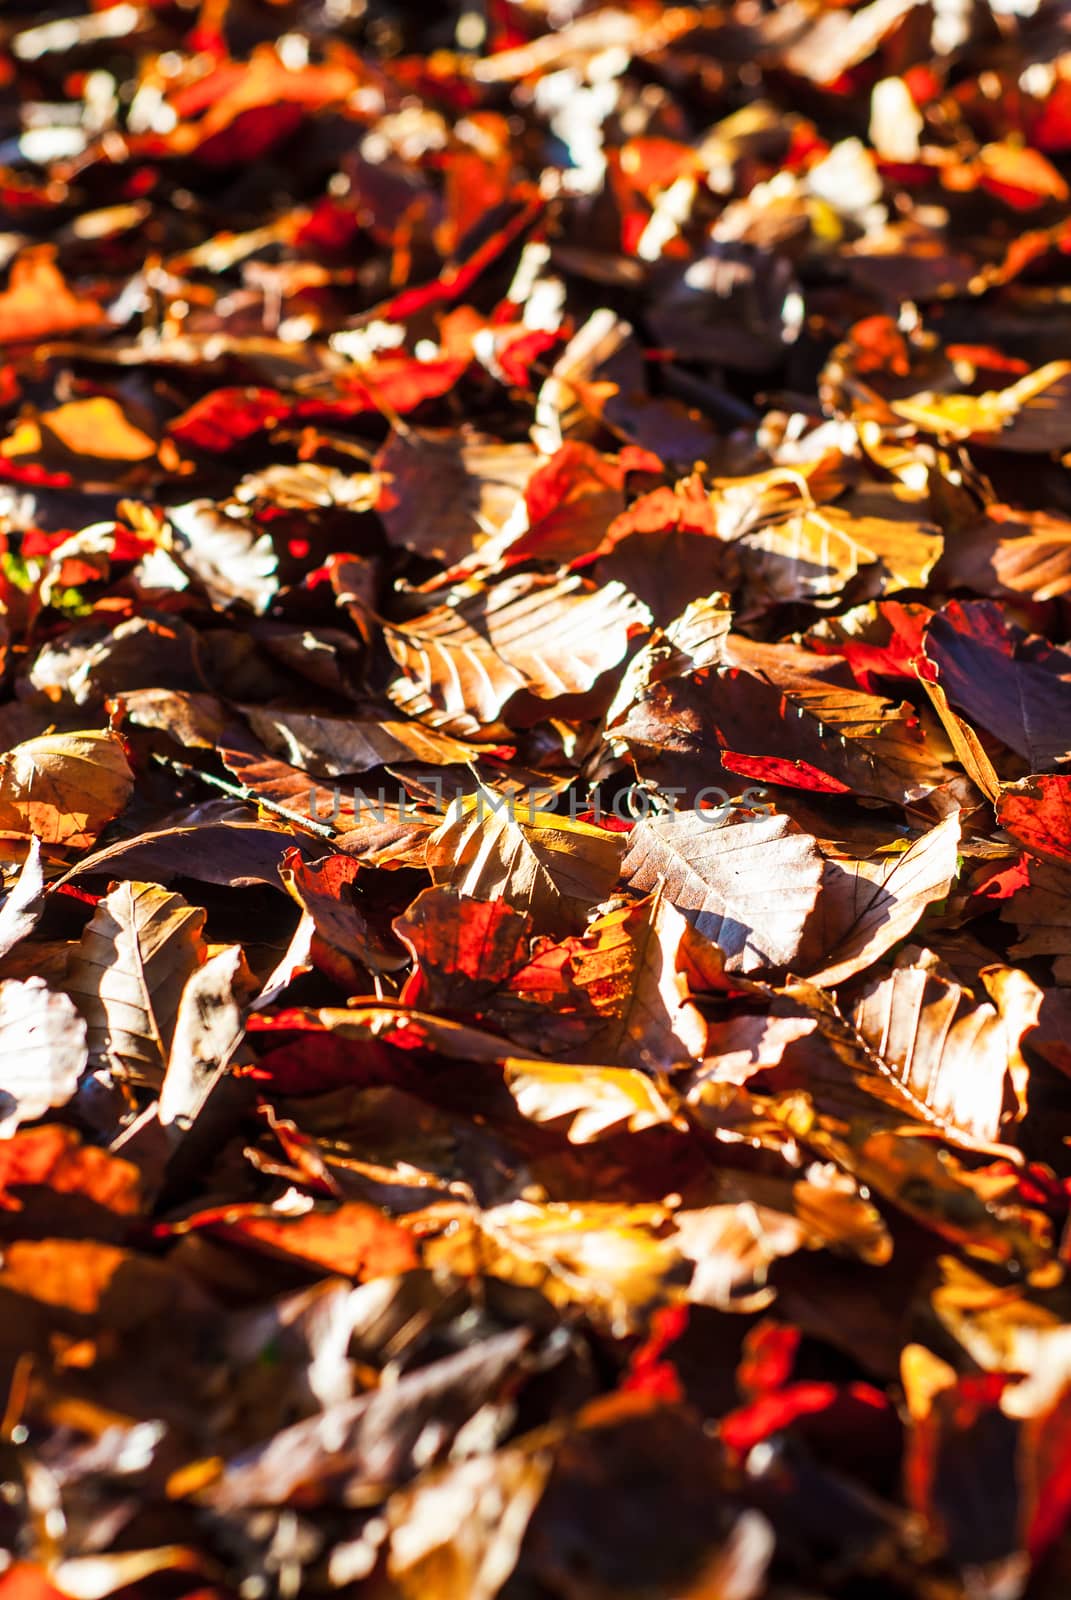 Dry autumn beech leaves lying on the ground in the forest lit by sunlight. Autumn, nature and aging concepts UK by paddythegolfer